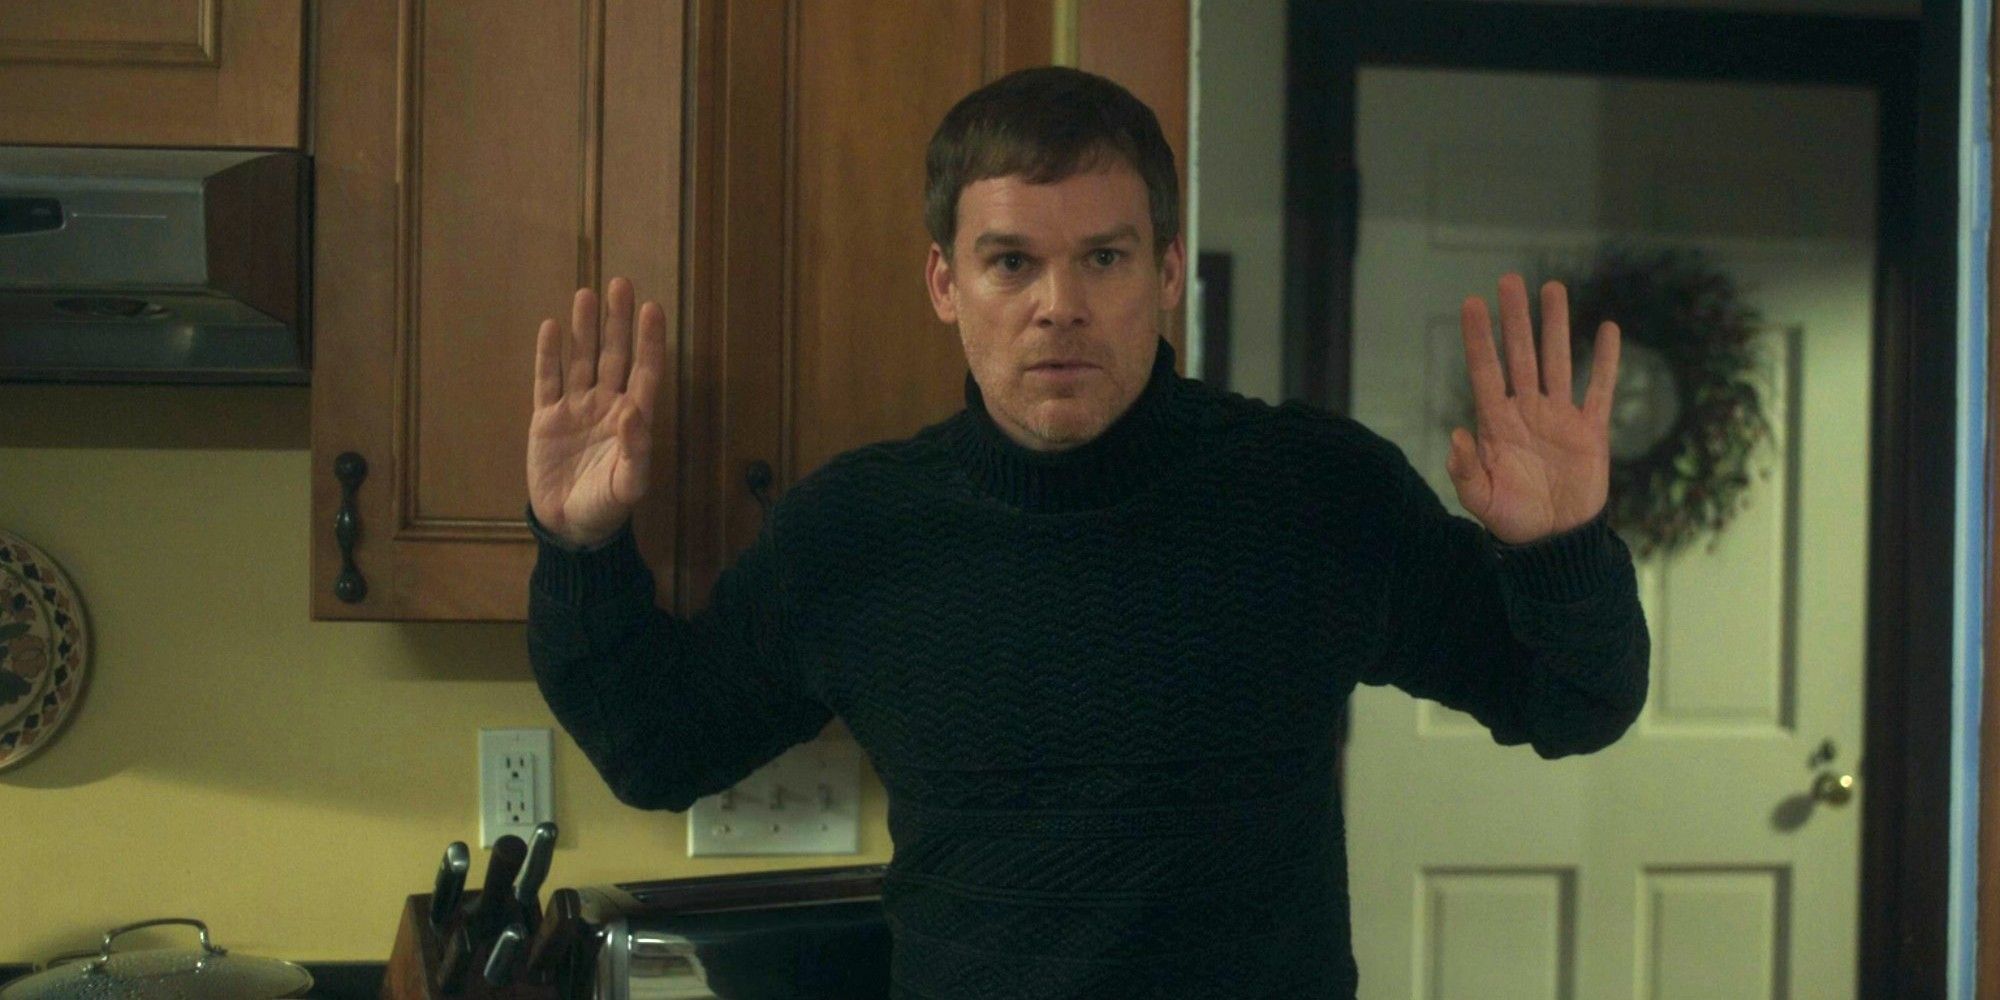 Dexter holds up his hands in New Blood.